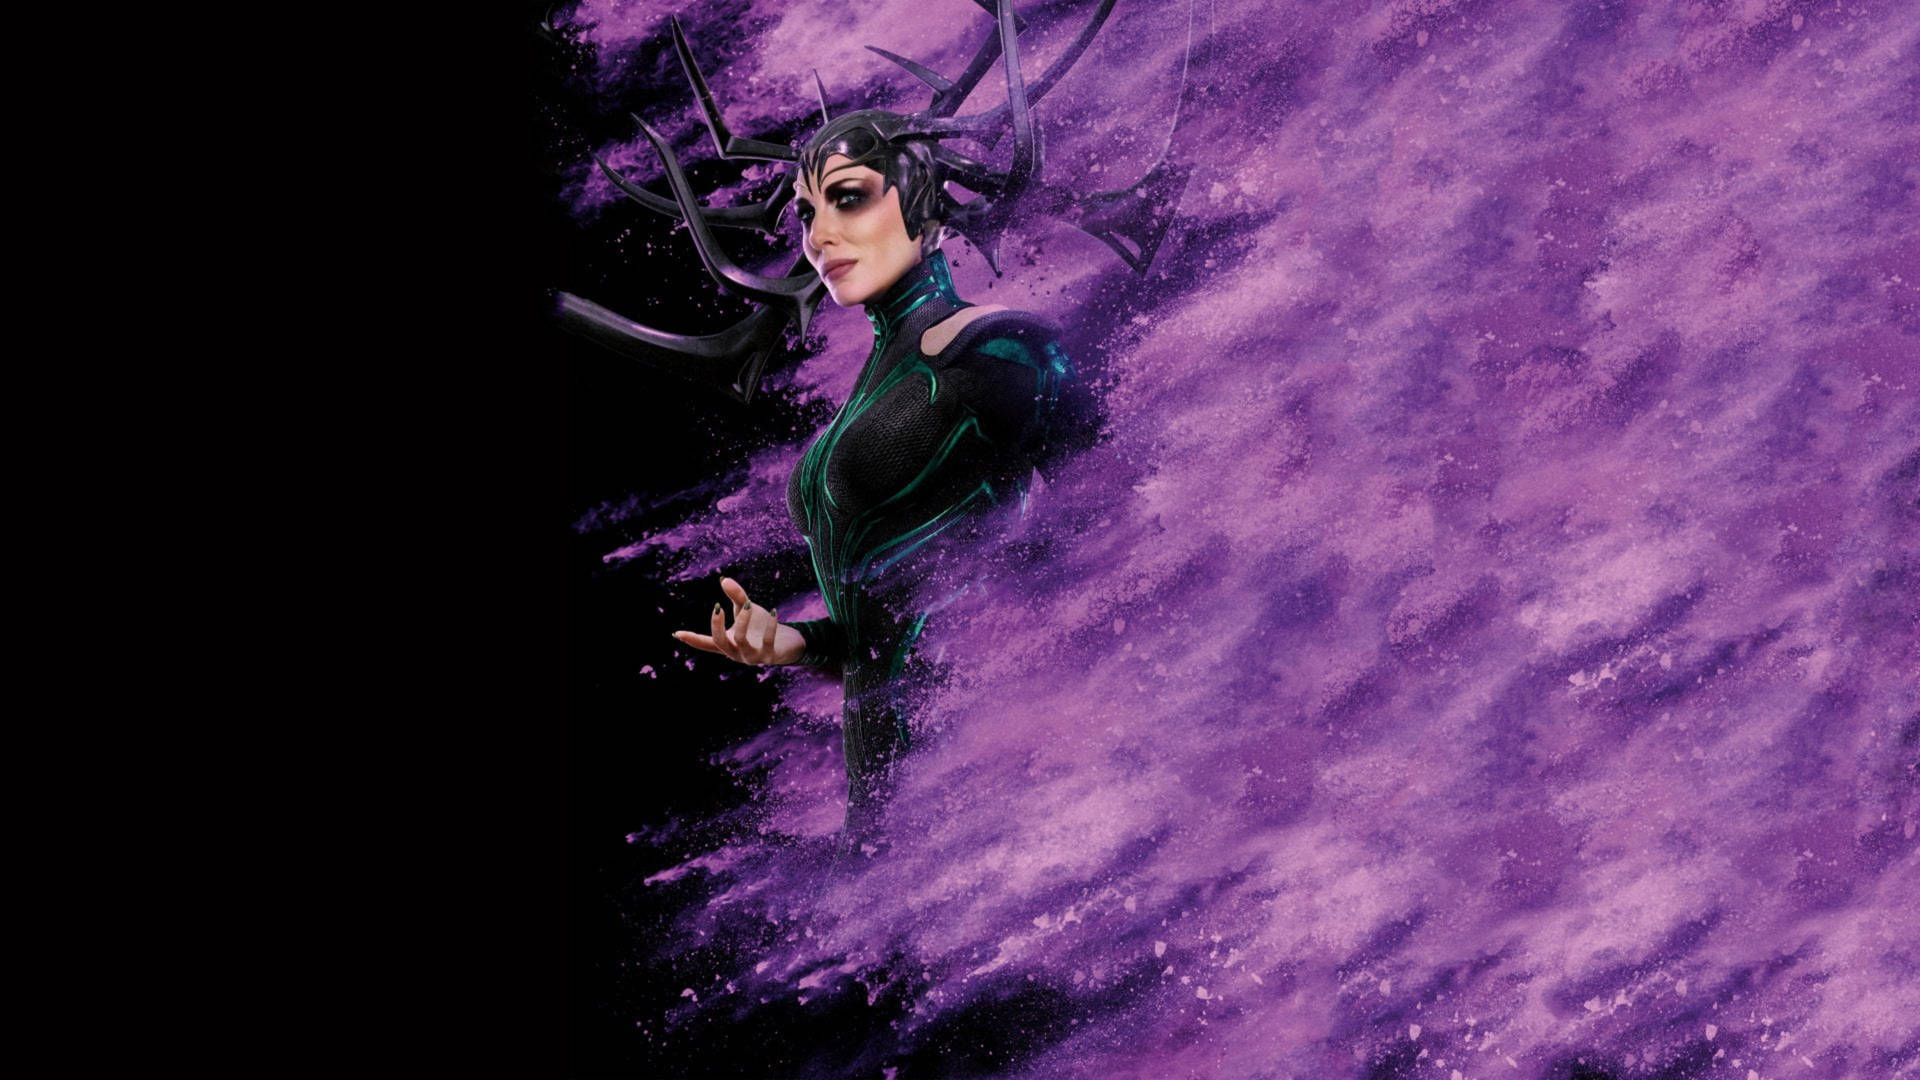 Hela, The Goddess Of Death In Menacing Stance